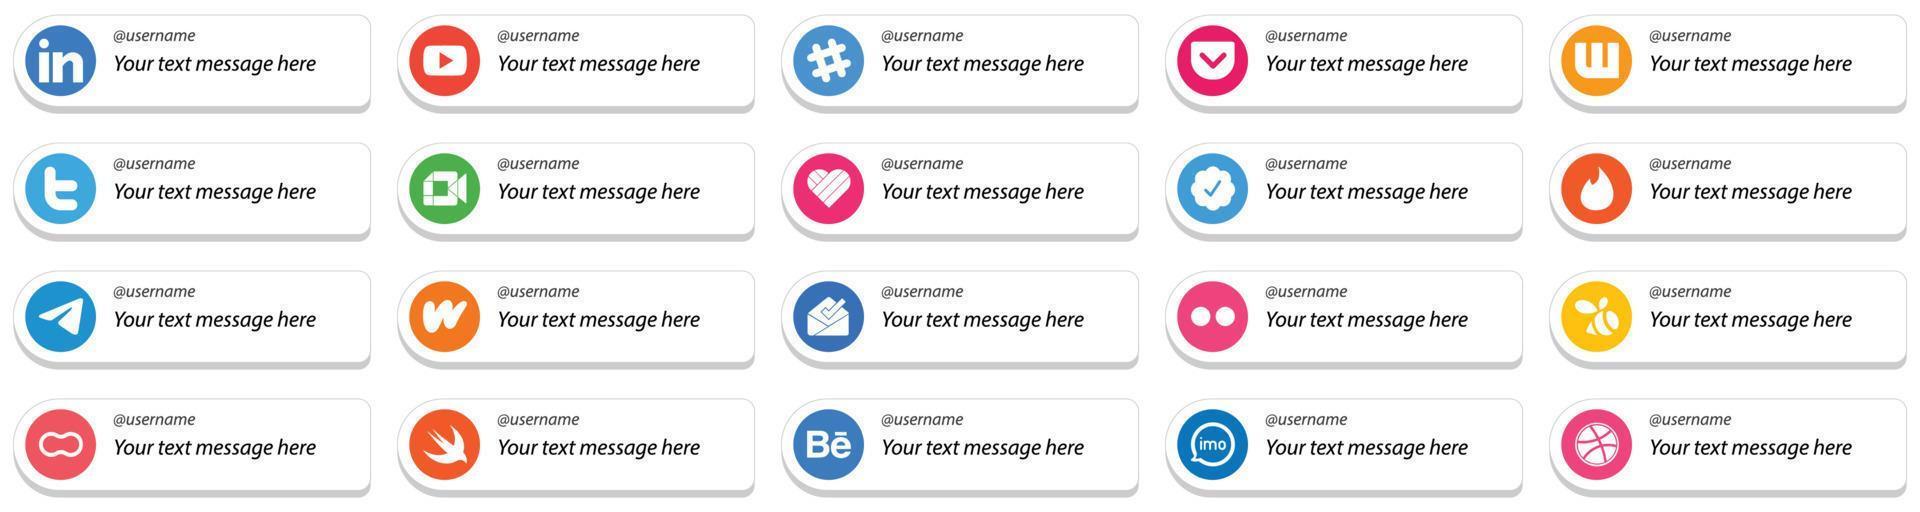 Customizable Follow Me Social Media Icons 20 pack such as telegram. tweet. tinder and likee icons. High quality and minimalist vector